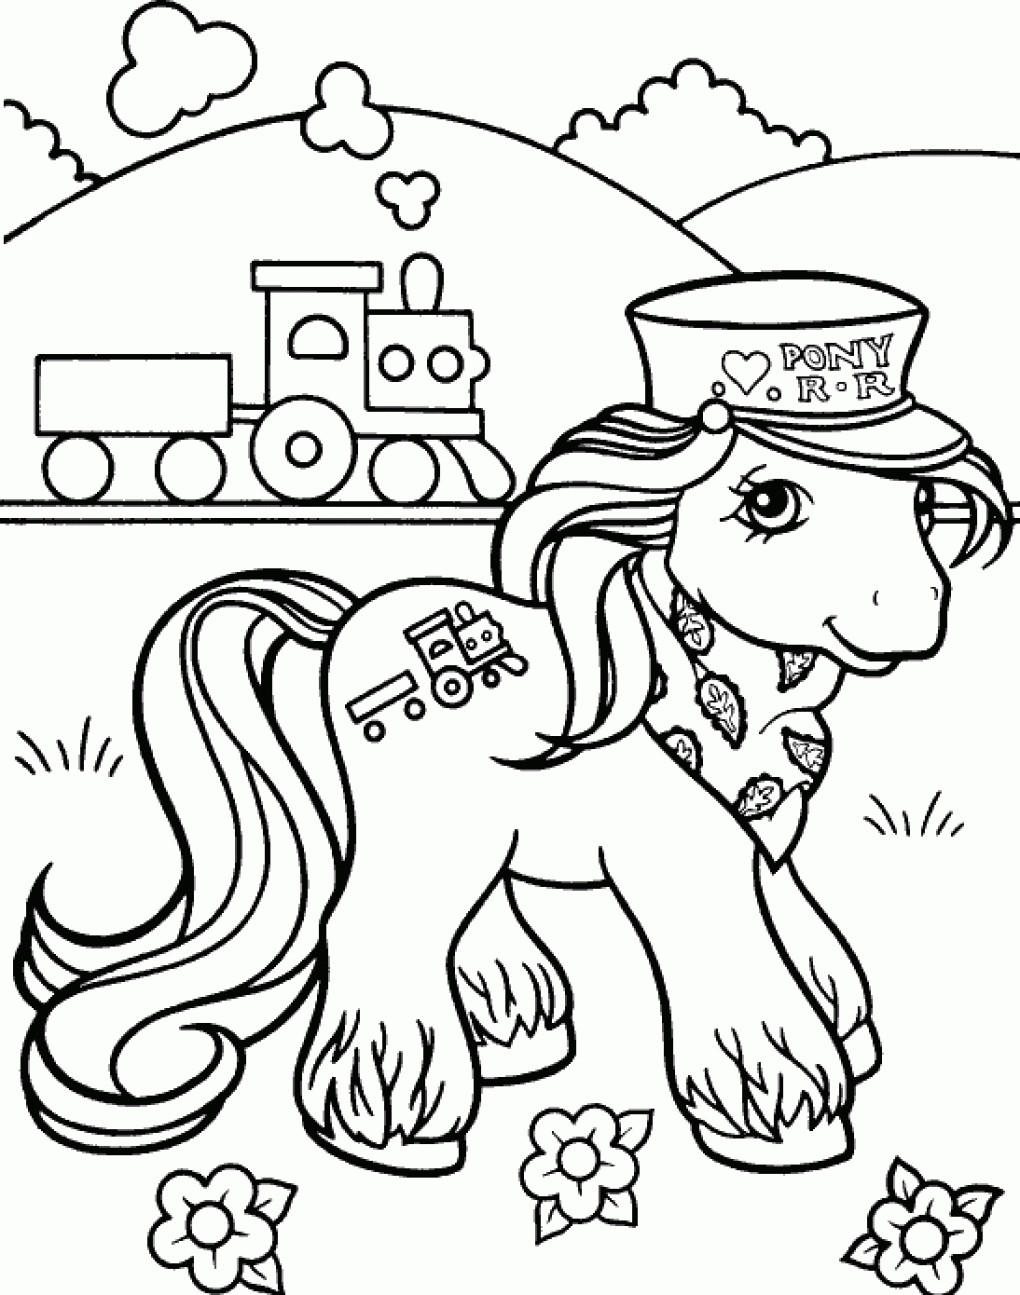 Kids Coloring Pages My Little Pony
 FUN & LEARN Free worksheets for kid My little pony free